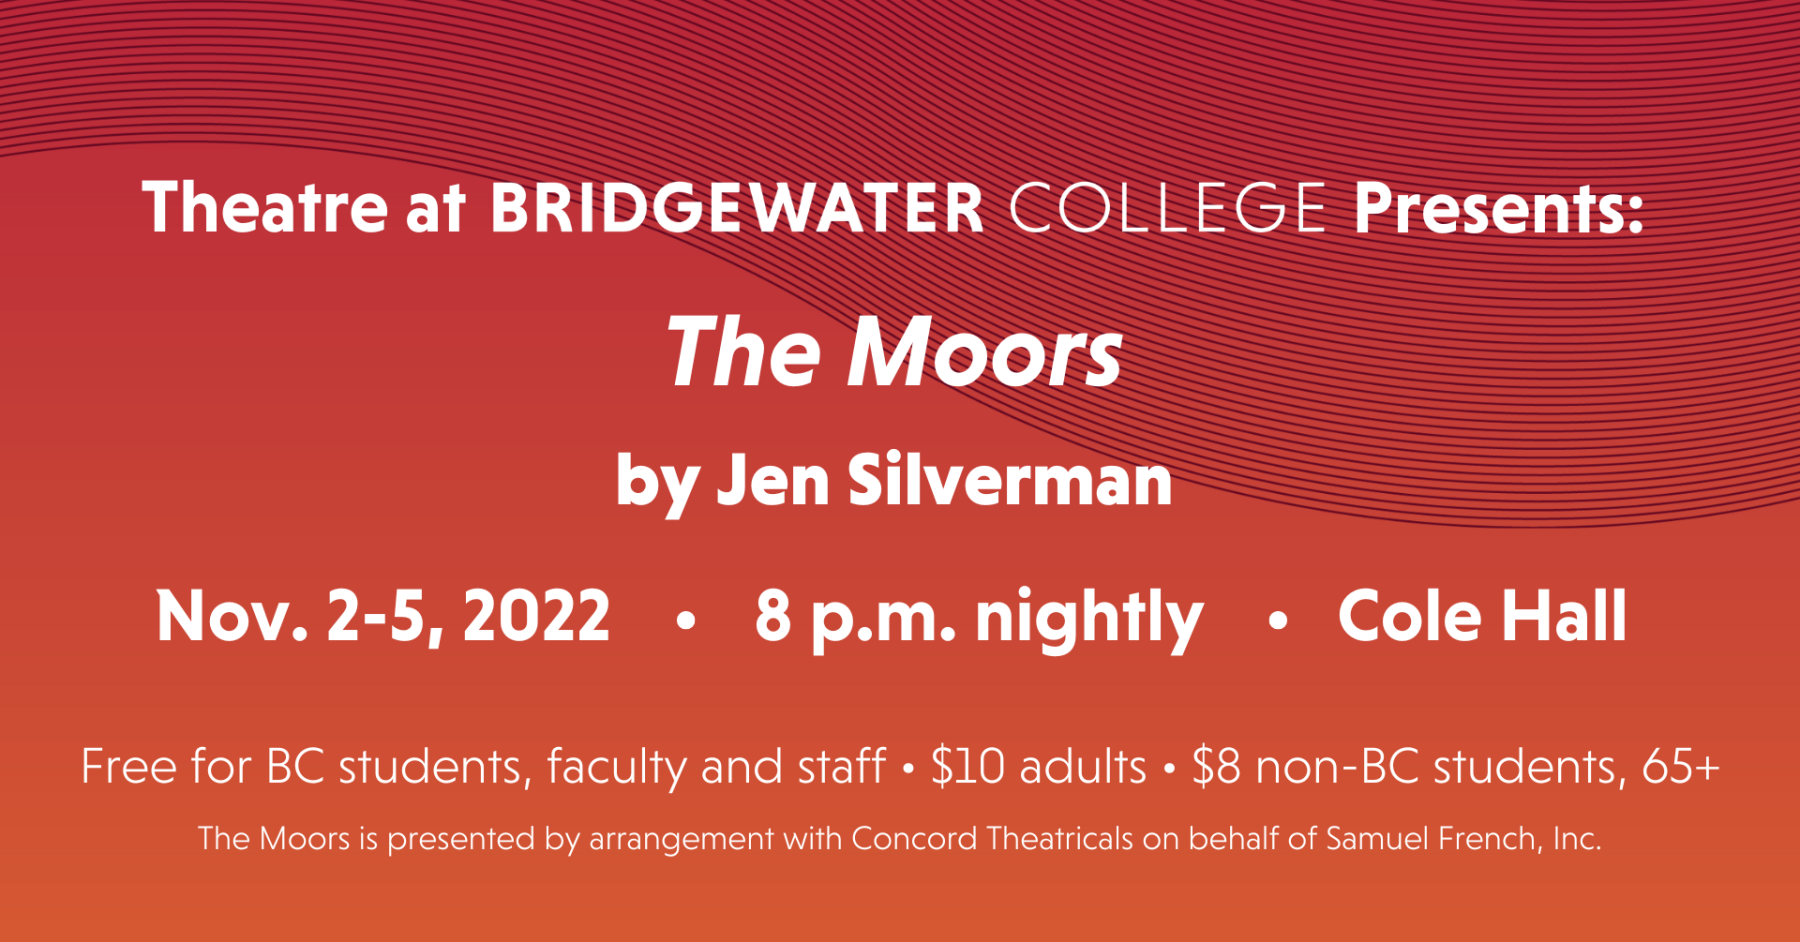 Theatre at Bridgewater College presents The Moors by Jen Silverman Nov 2-5, 2022 8 p.m. nightly Cole Hall. Free for BC students, faculty and staff; $10 adults; $8 non-BC students, 65+. The Moors is presented by arrangement with Concord Theatricals on behalf of Samuel French, Inc.